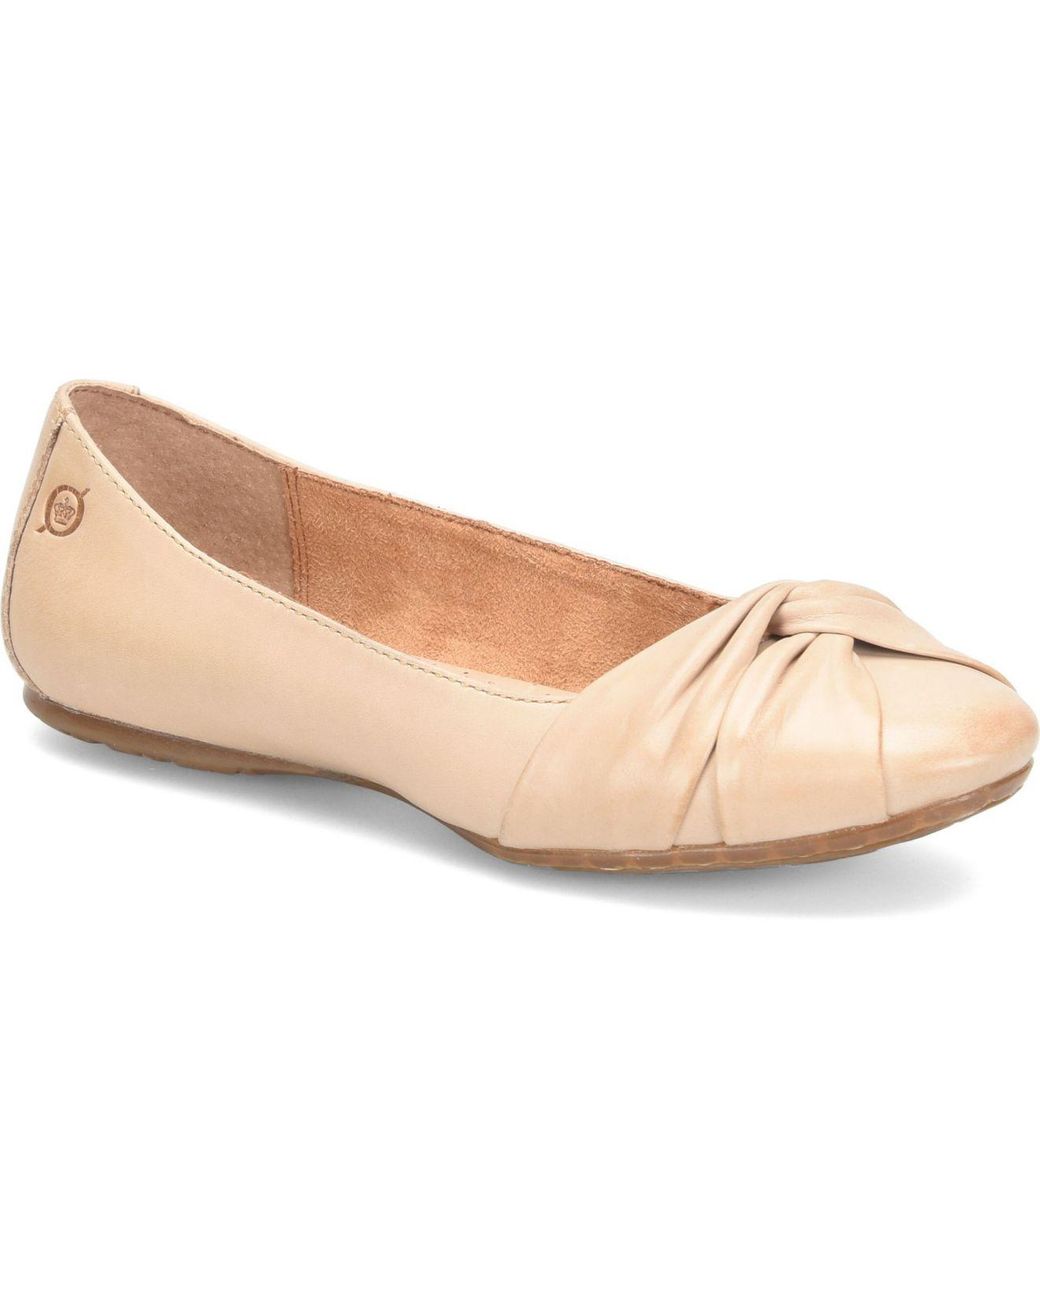 Born Leather Lilly Flats, Created For Macy's in Natural Leather ...